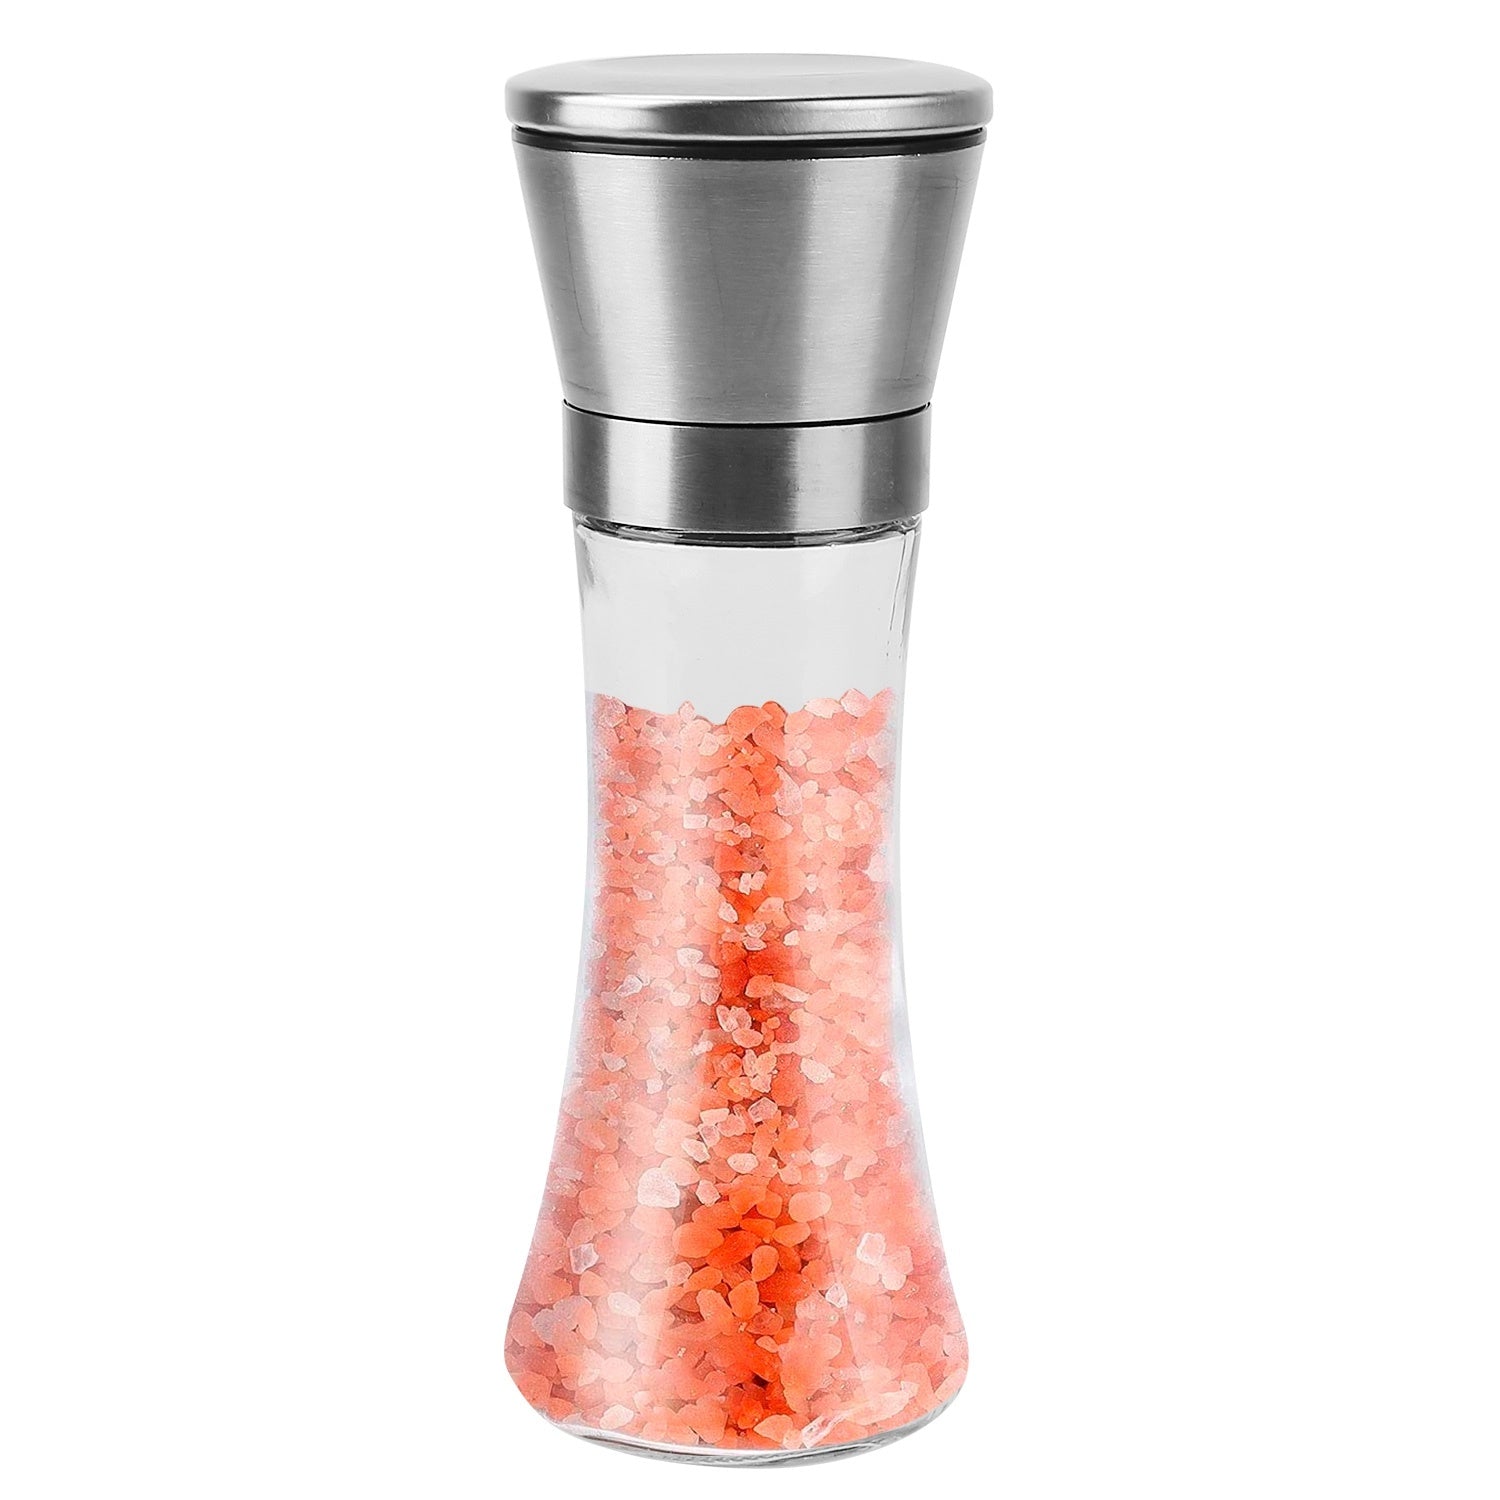 A picture of a Stainless Steel Salt Pepper Grinder Tall Glass Sea Salt & Pepper Mill Shaker with Adjustable Coarseness for spices.